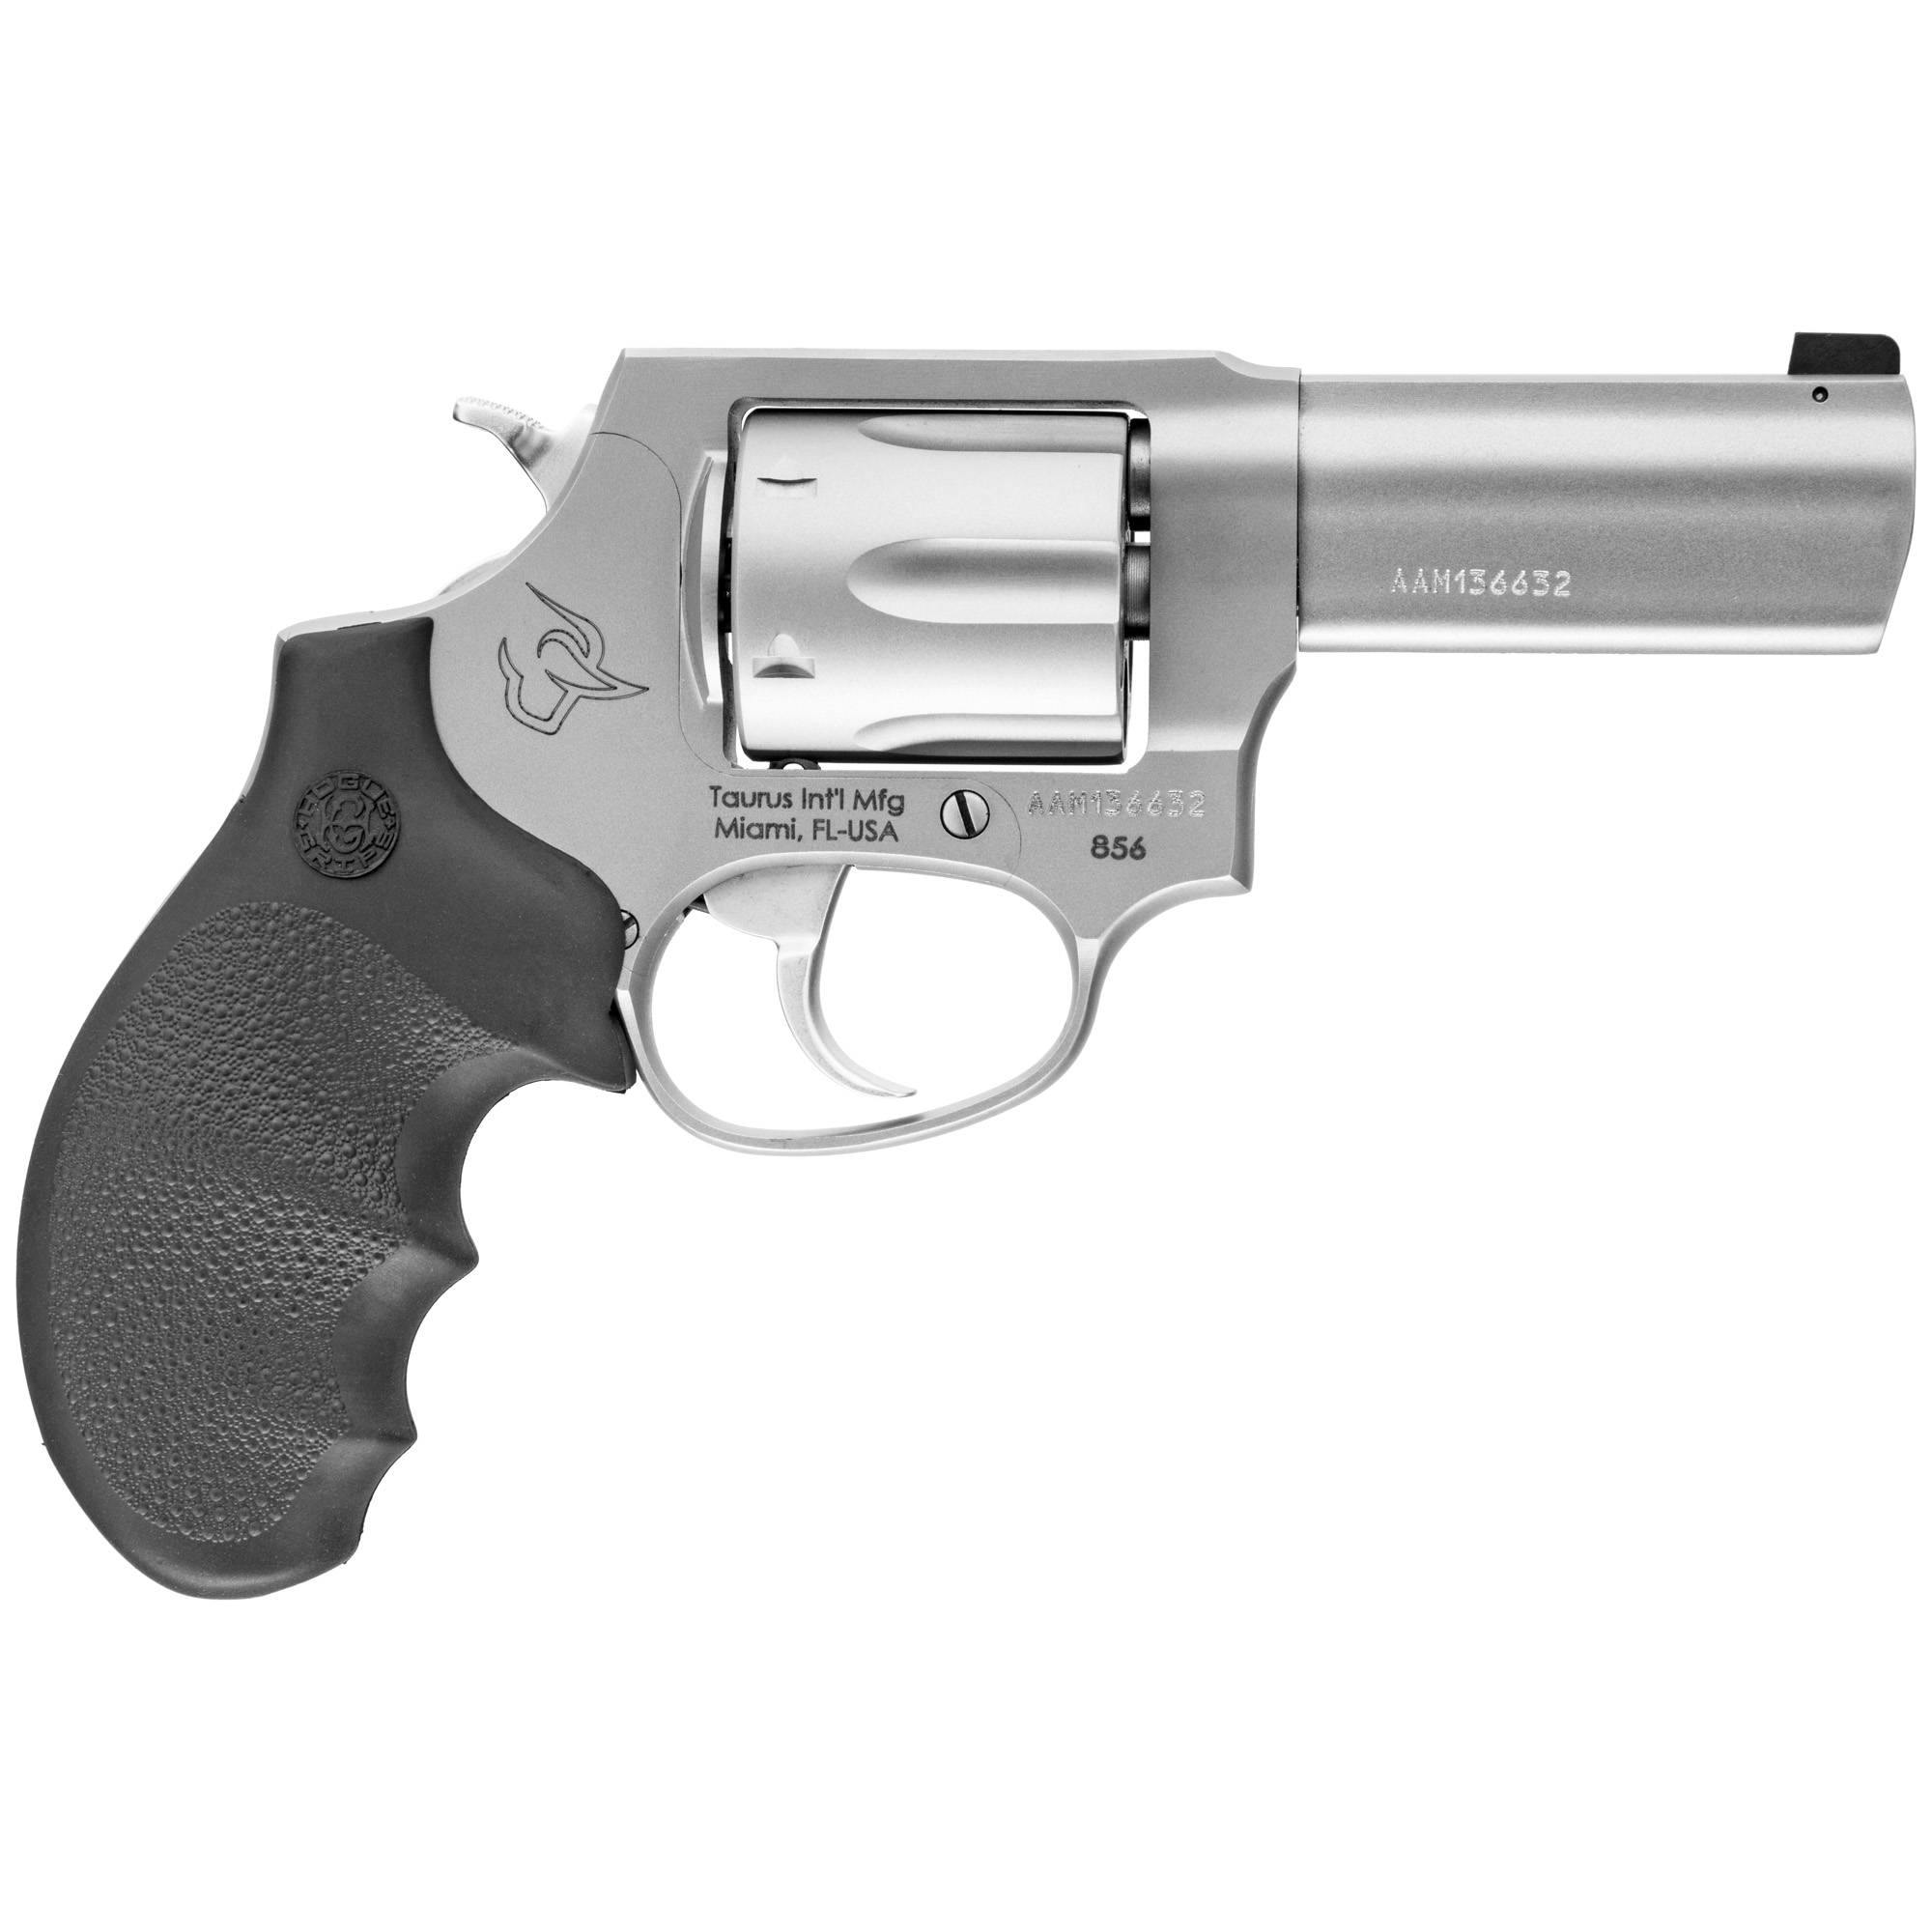 Taurus, Model 856, Double Action, Metal Frame Revolver, Medium Frame, 38 Special, 3" Barrel, Stainless Steel, Matte Finish, Silver, Hogue Grip, 6 Rounds